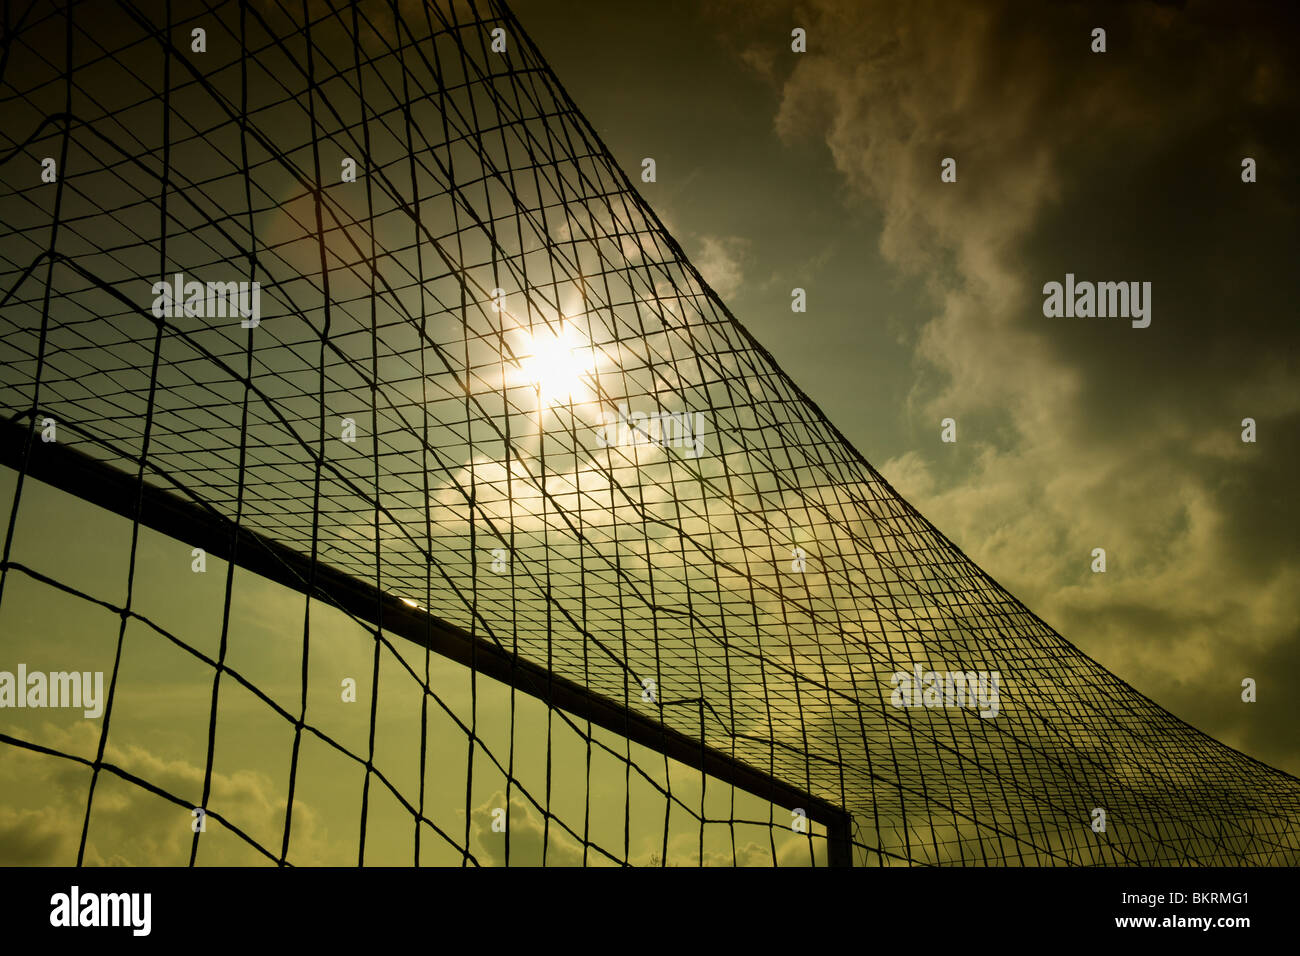 Wum grid of a football gate Stock Photo